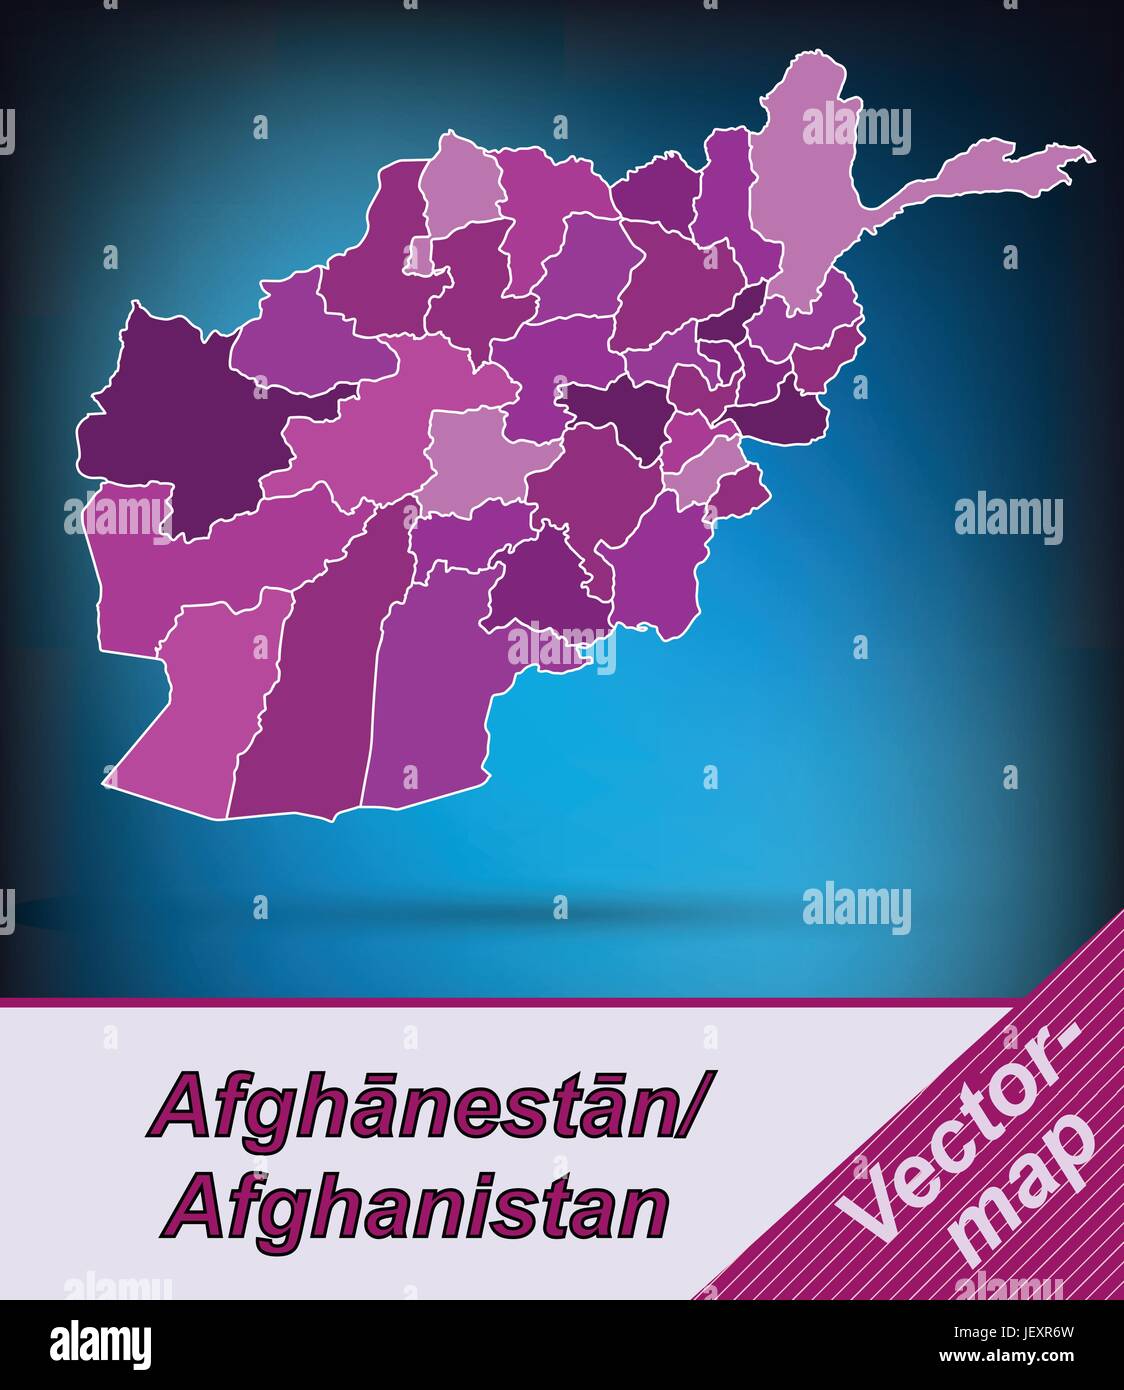 boundary map of afghanistan with borders in violet Stock Vector